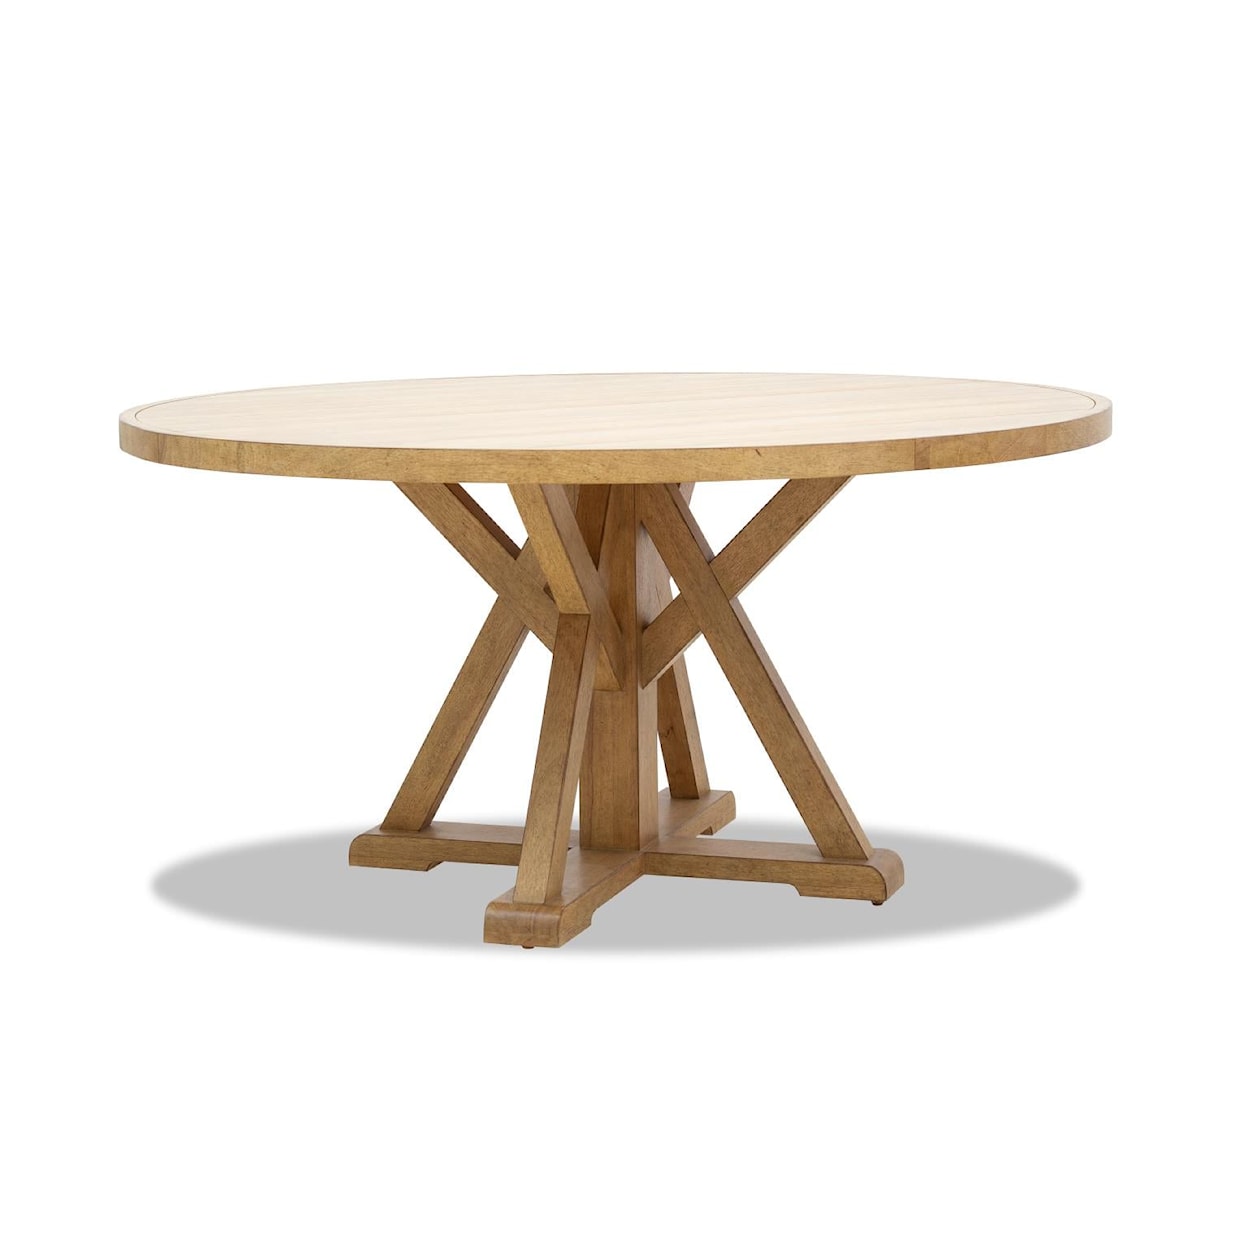 Trisha Yearwood Home Collection by Legacy Classic Today's Traditions Round Pedestal Table